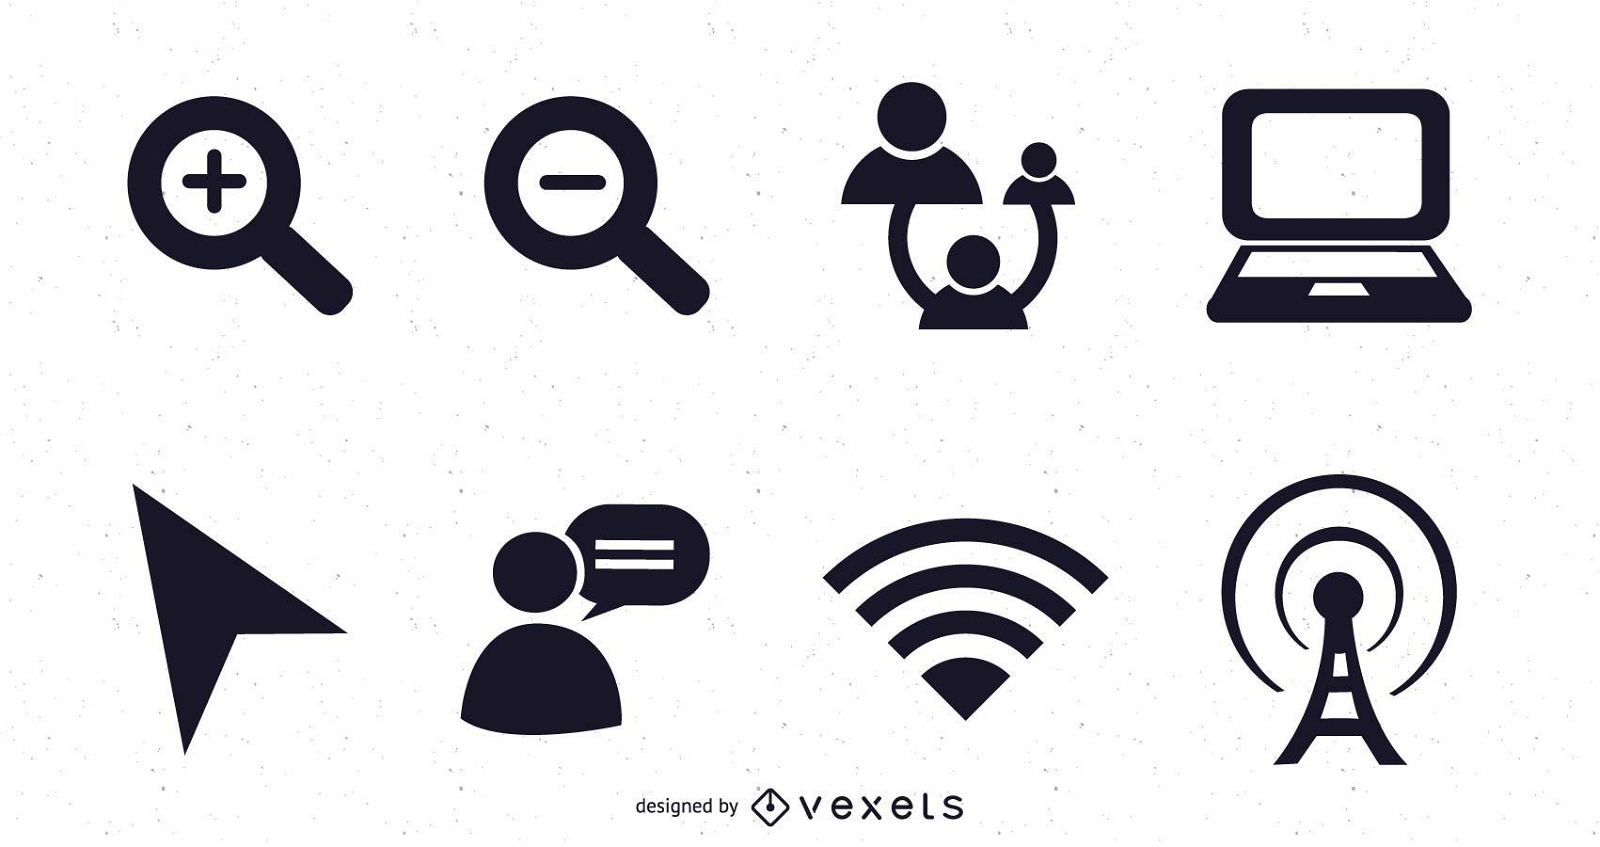 Web 2.0 vector icons